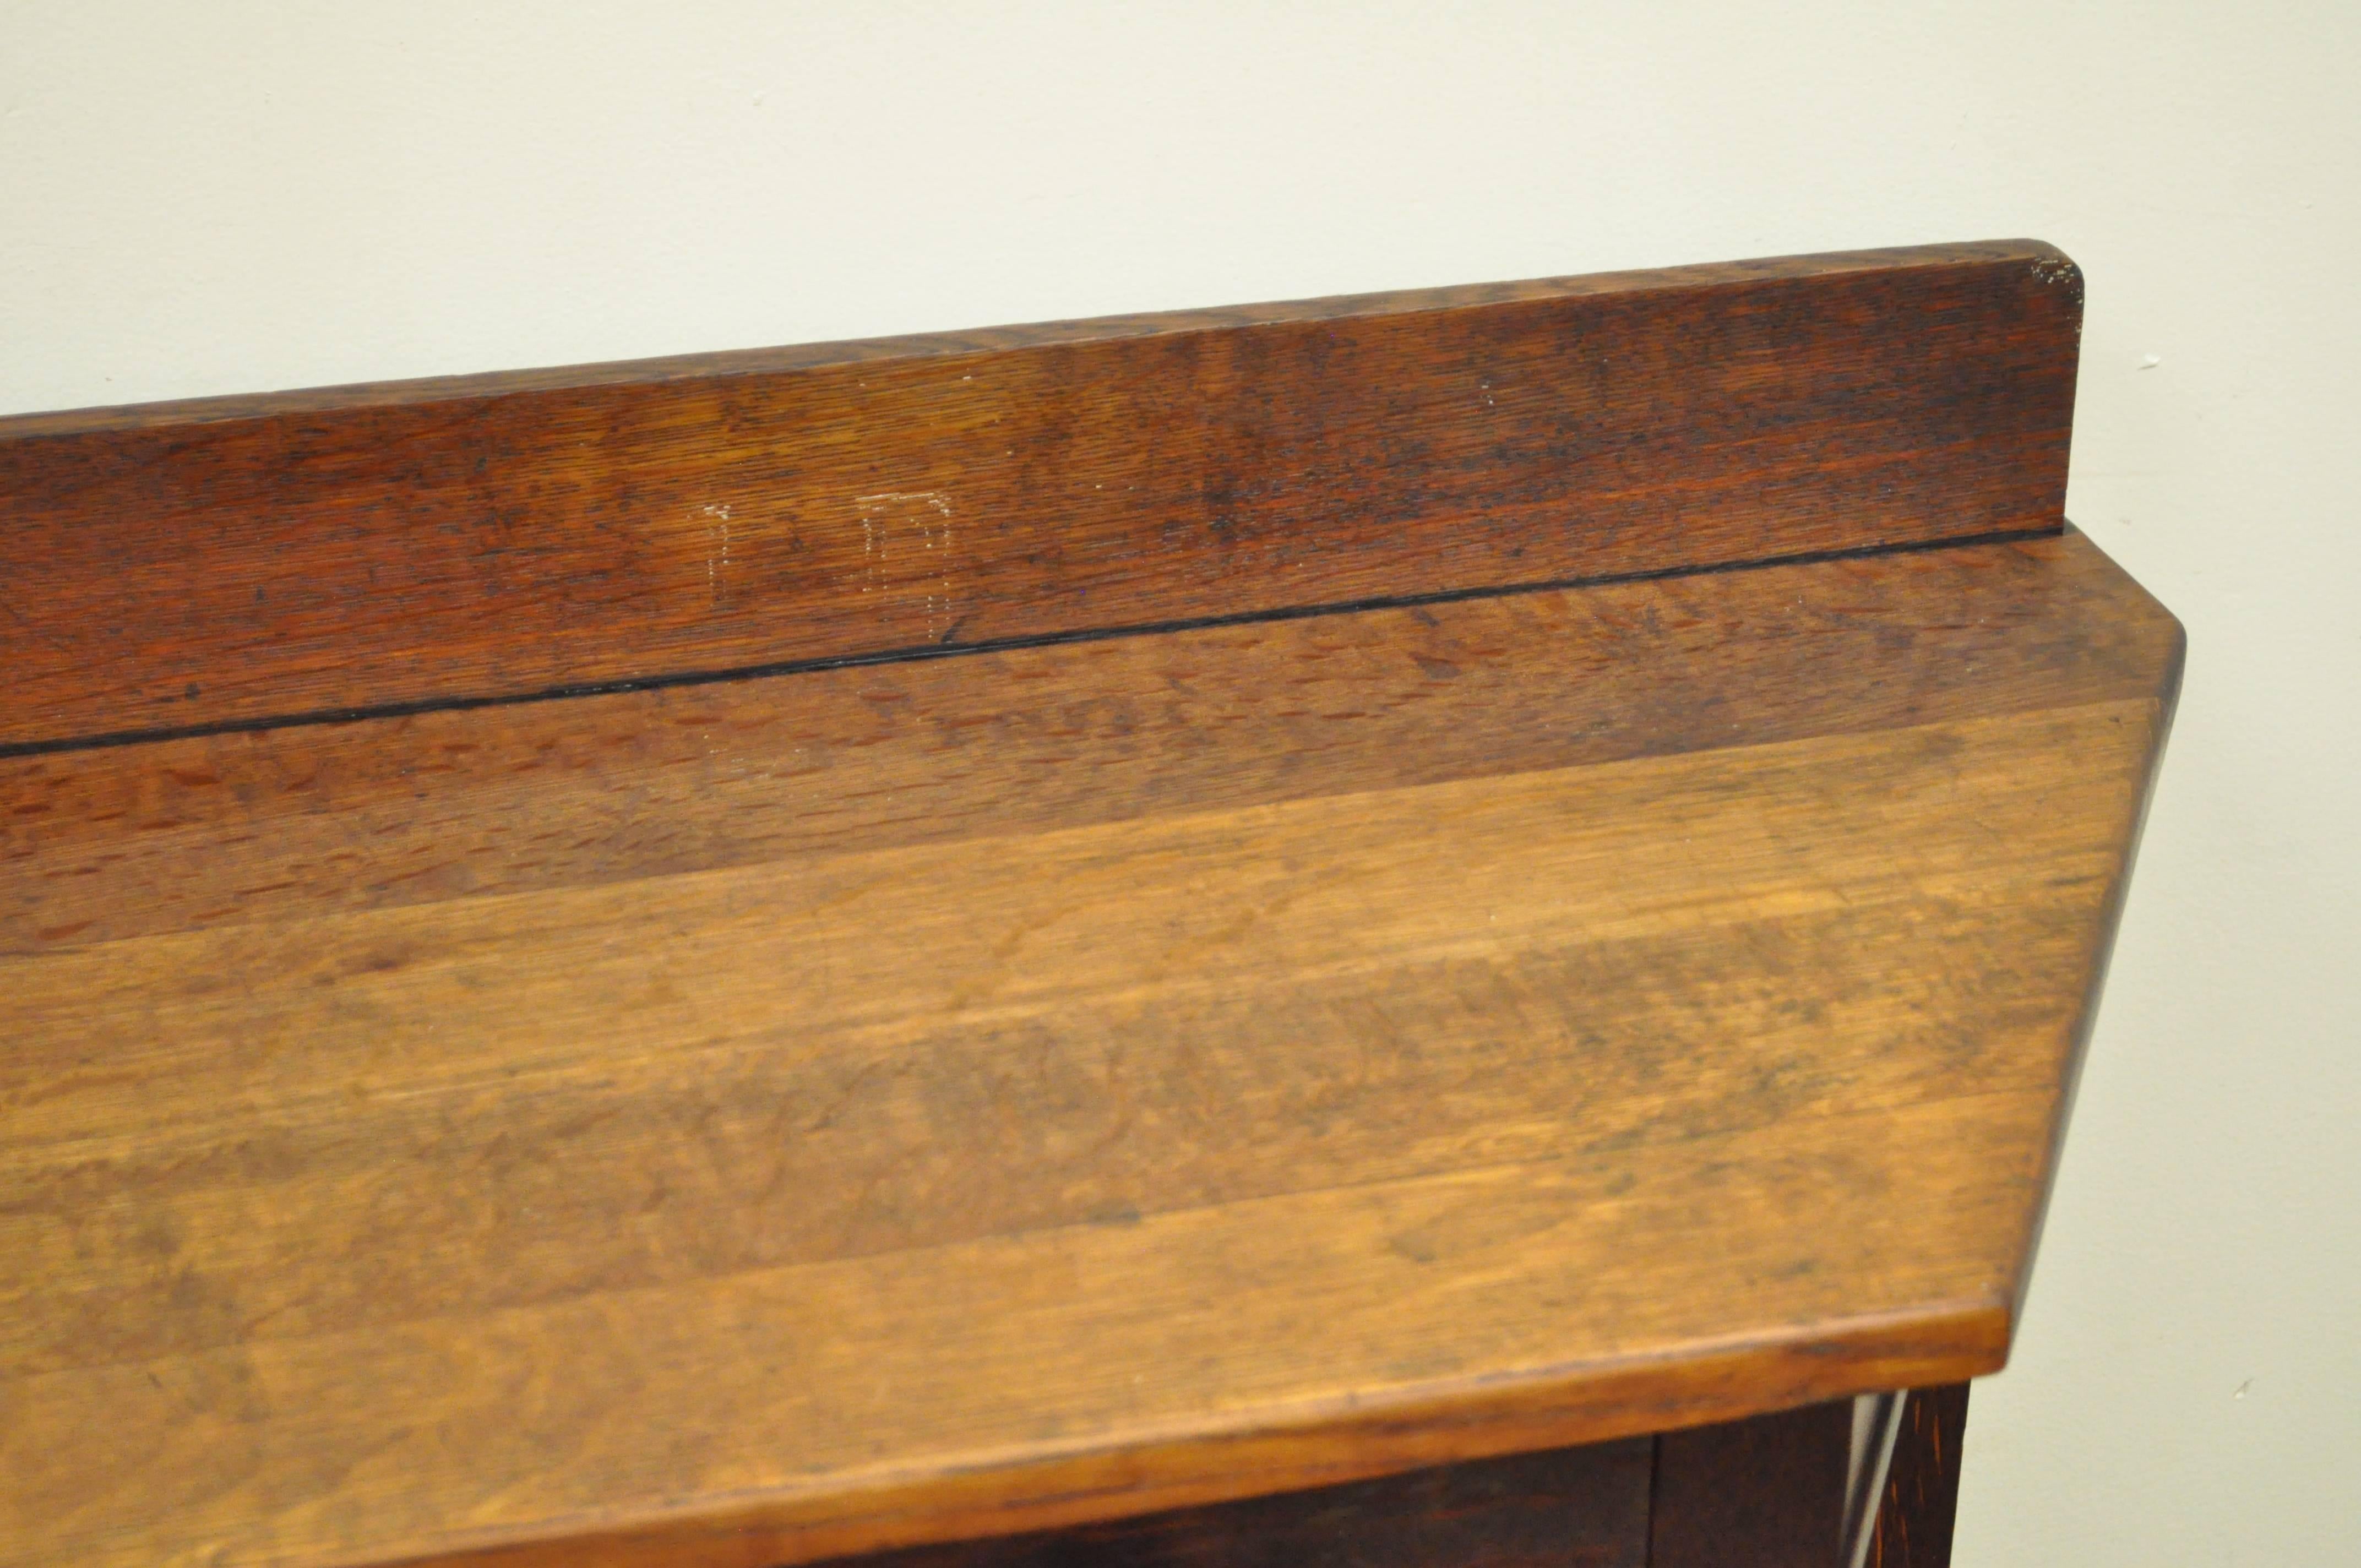 Early 20th Century Rare Limbert One-Drawer Mission Oak Console Table with Backsplash, circa 1910